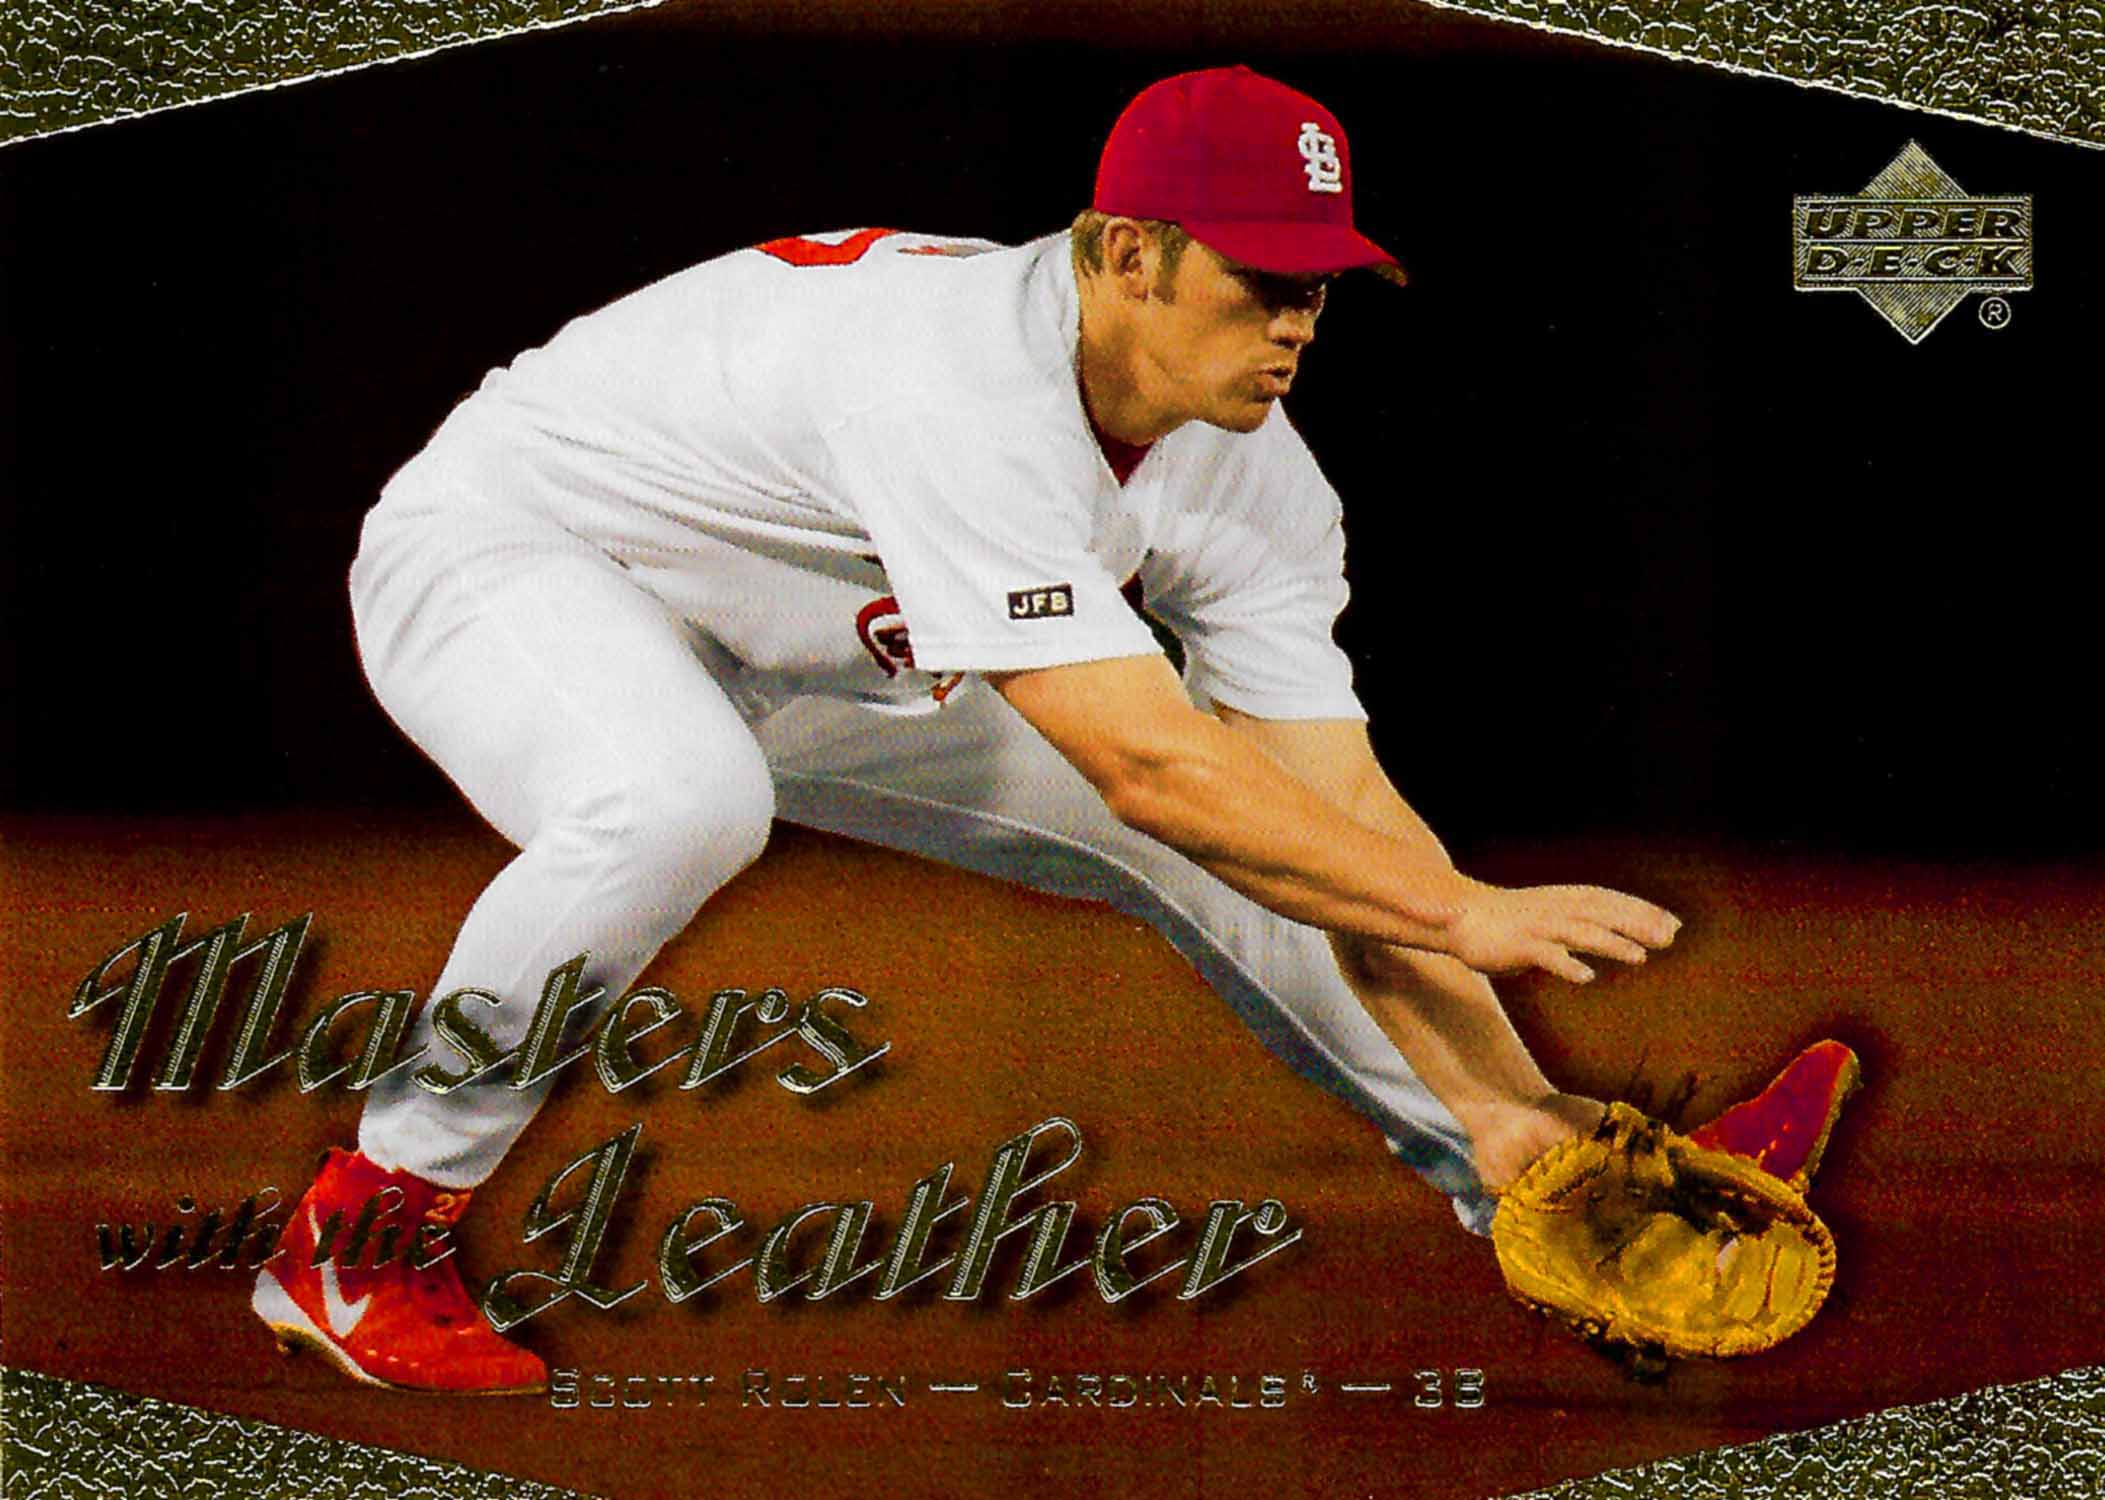 2003 Upper Deck Masters with the Leather